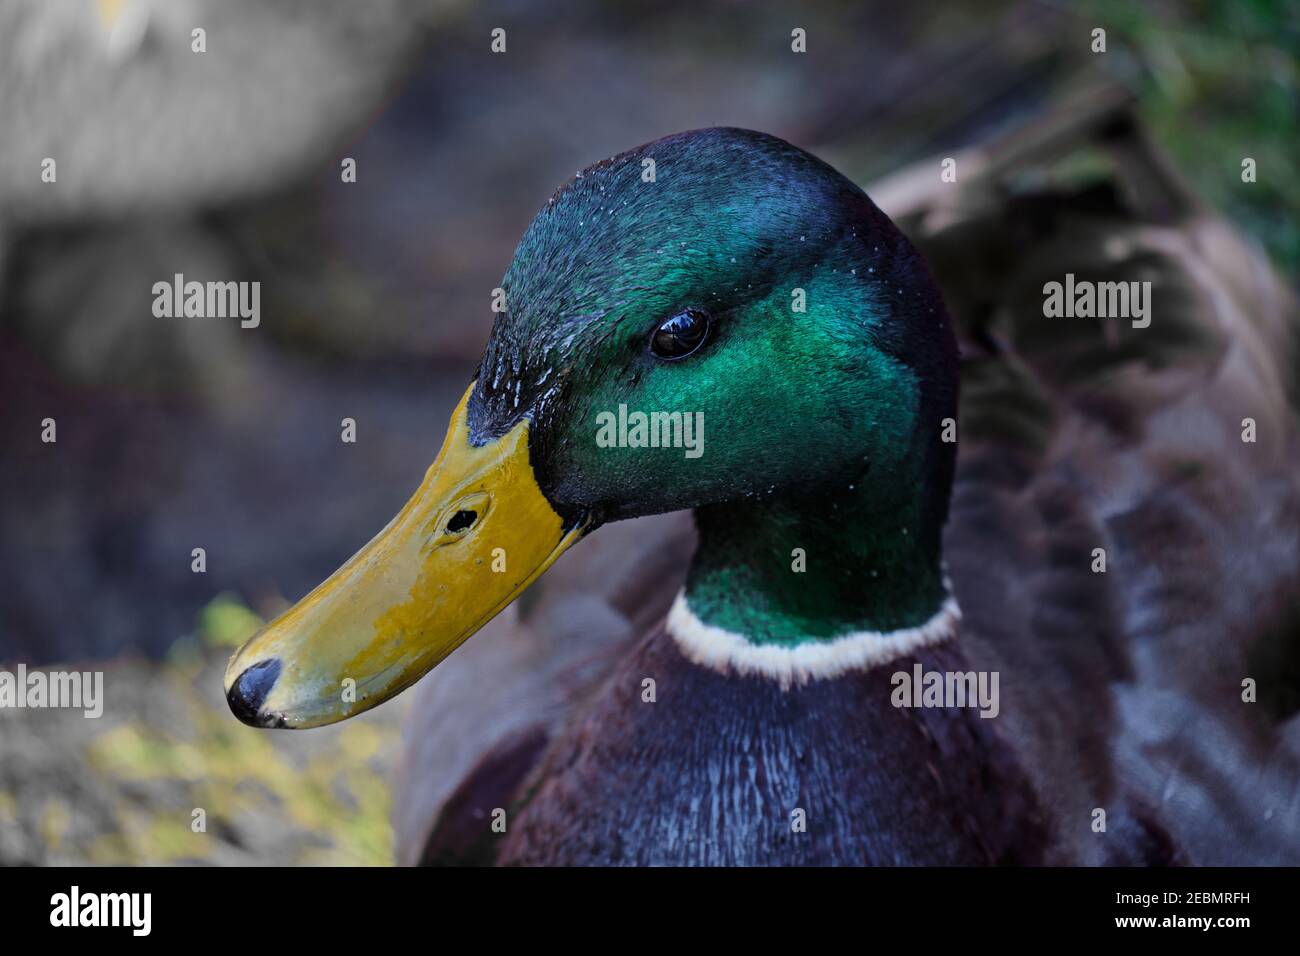 One mallard duck close-up with yellow beck, rich emerald-coloured plumage and a bright shiny eye. Stock Photo